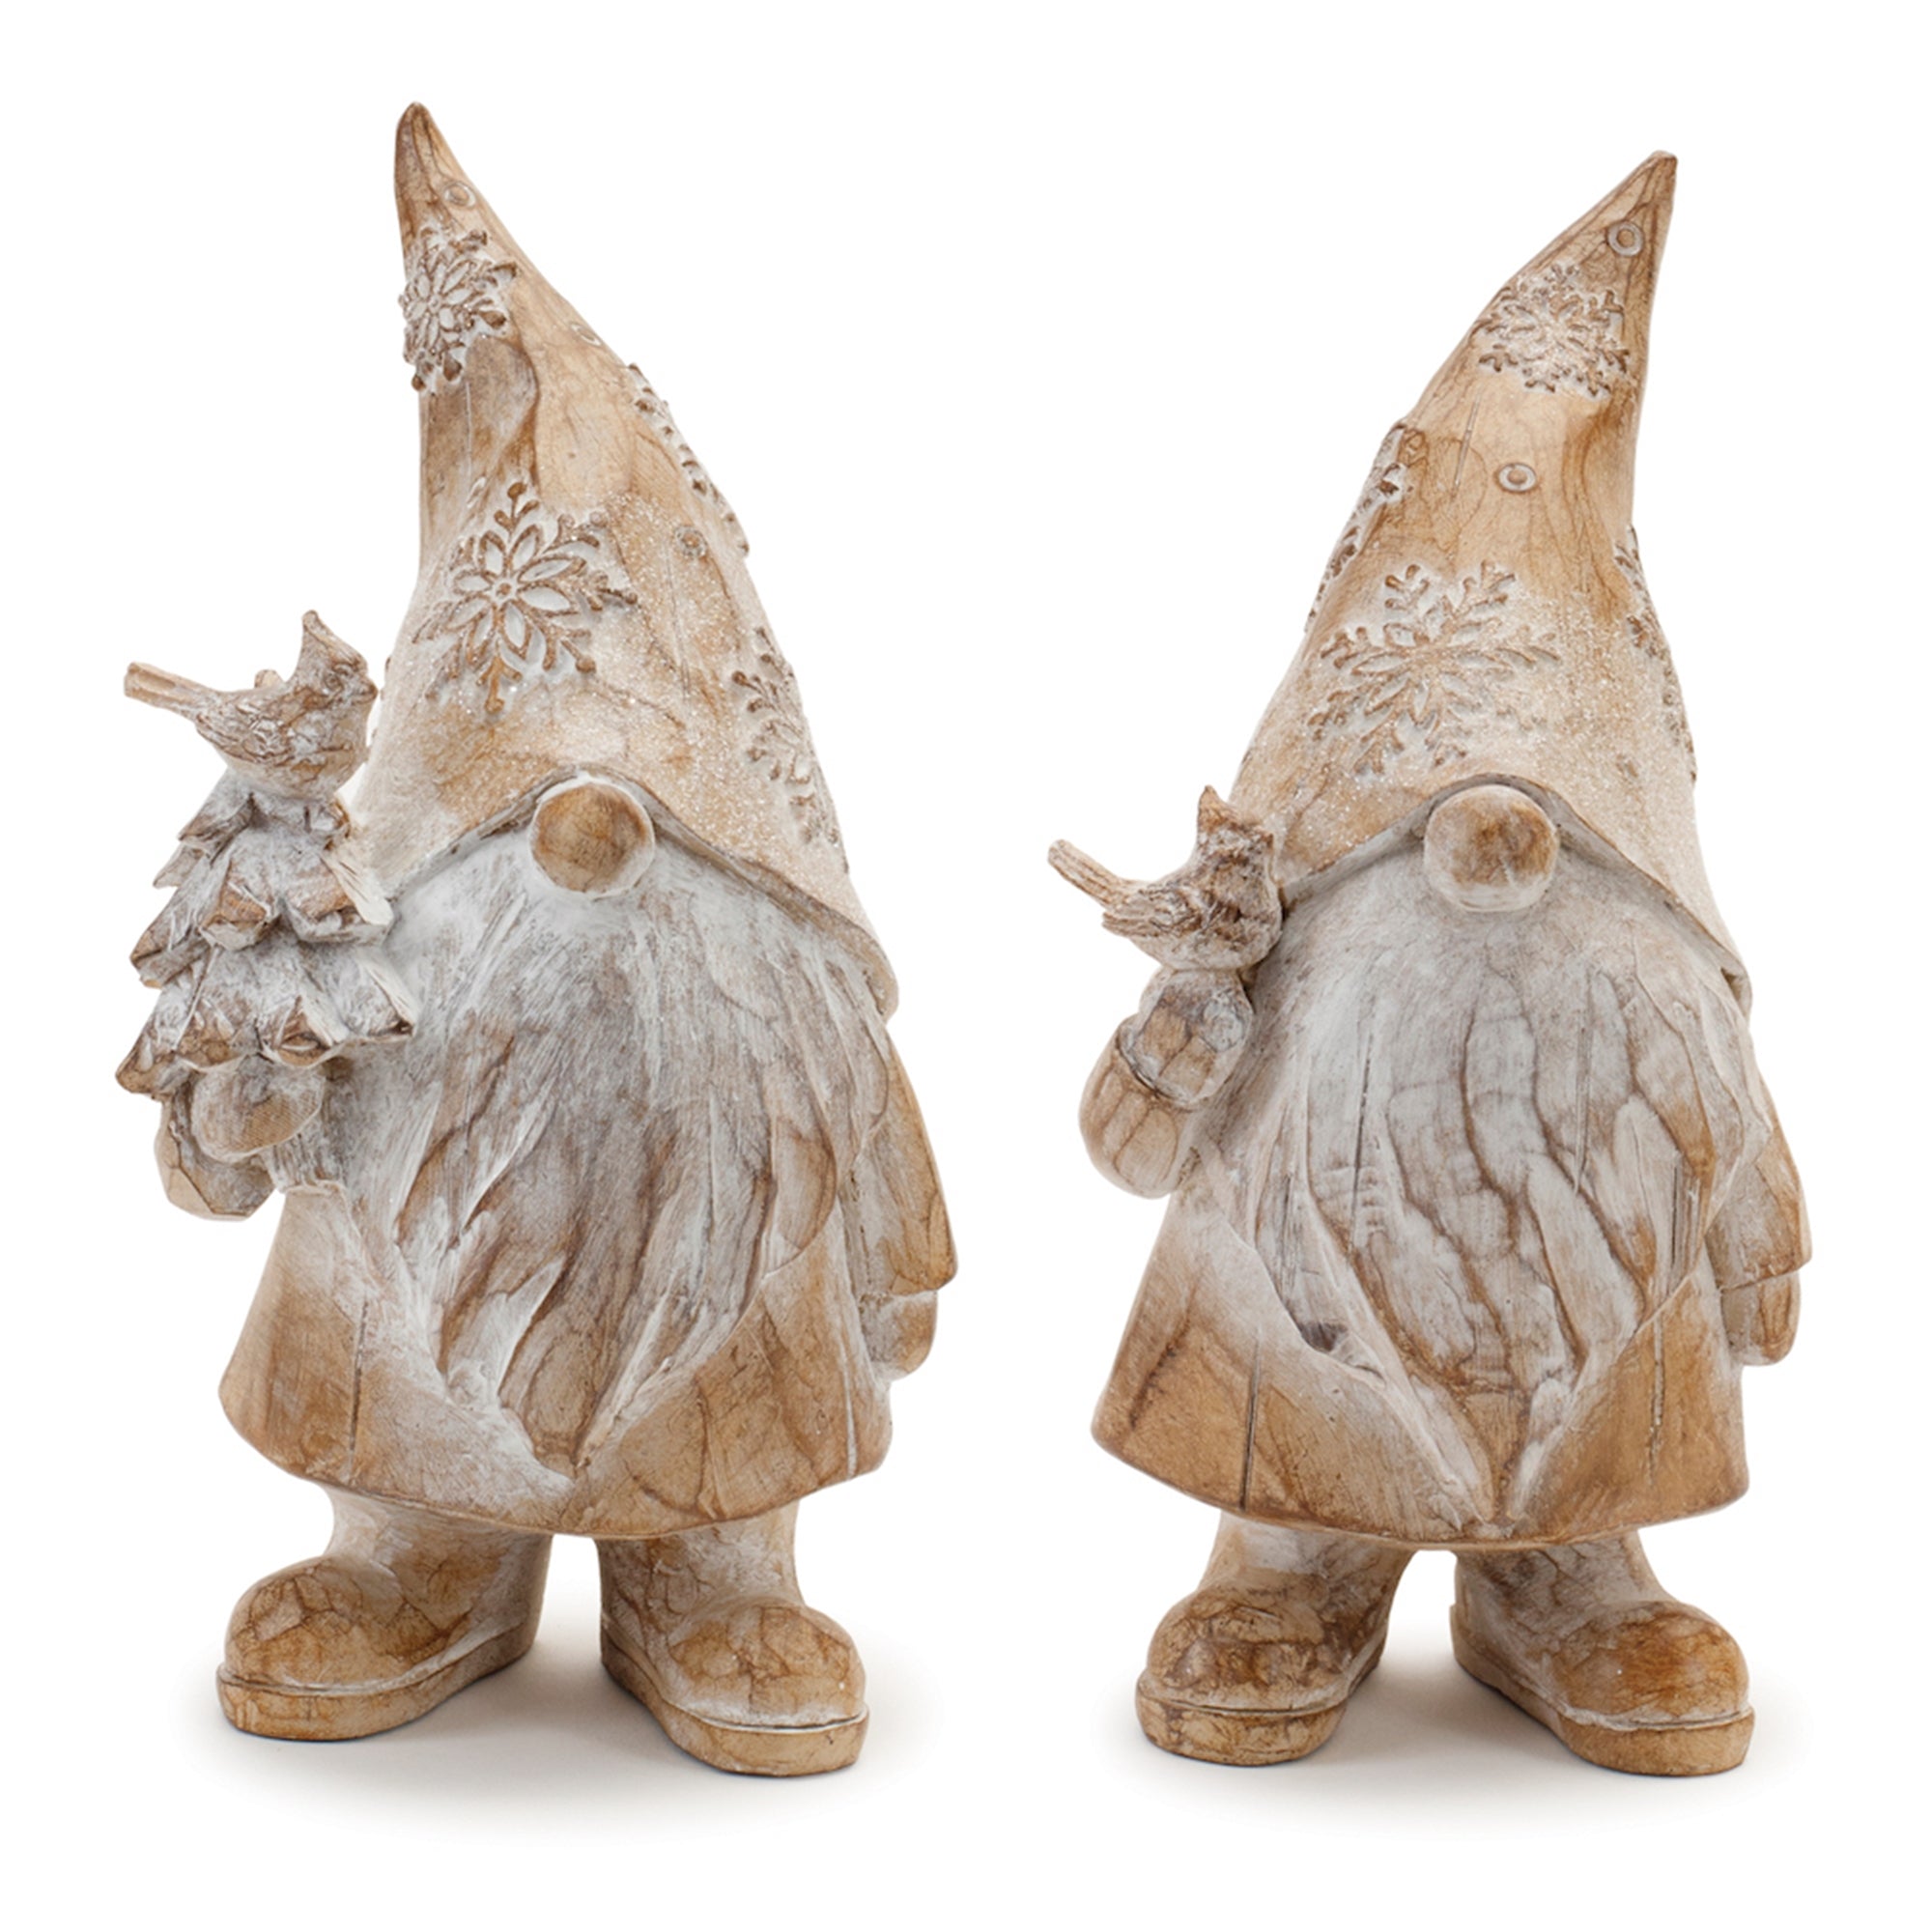 Carved Winter Gnome with Bird Figurine (Set of 2)